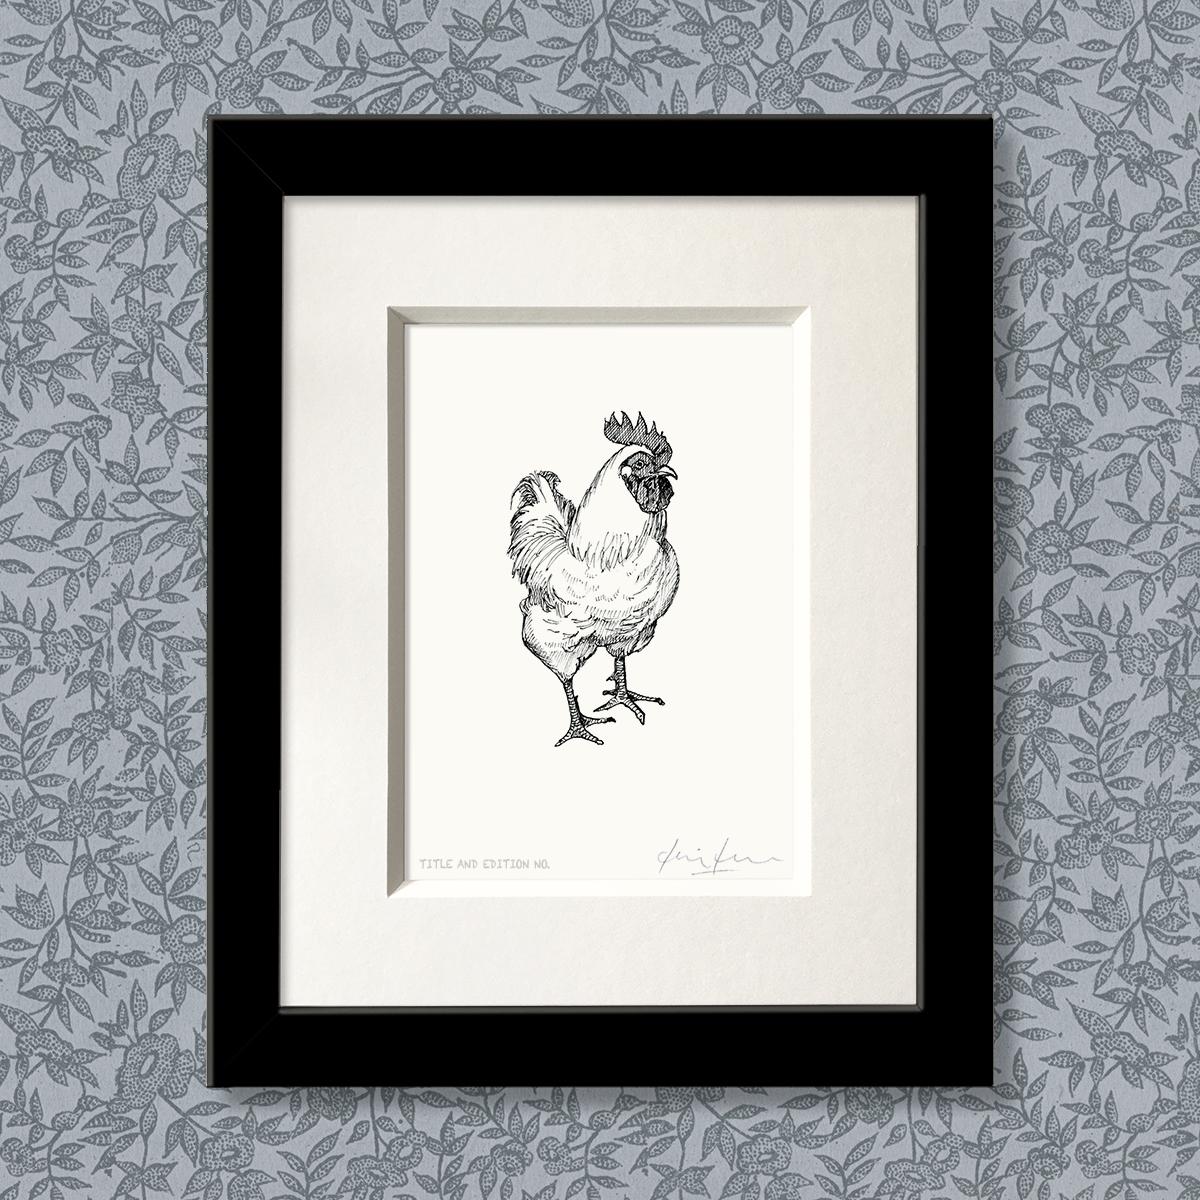 Limited edition print from pen and ink drawing of cockerel in black frame